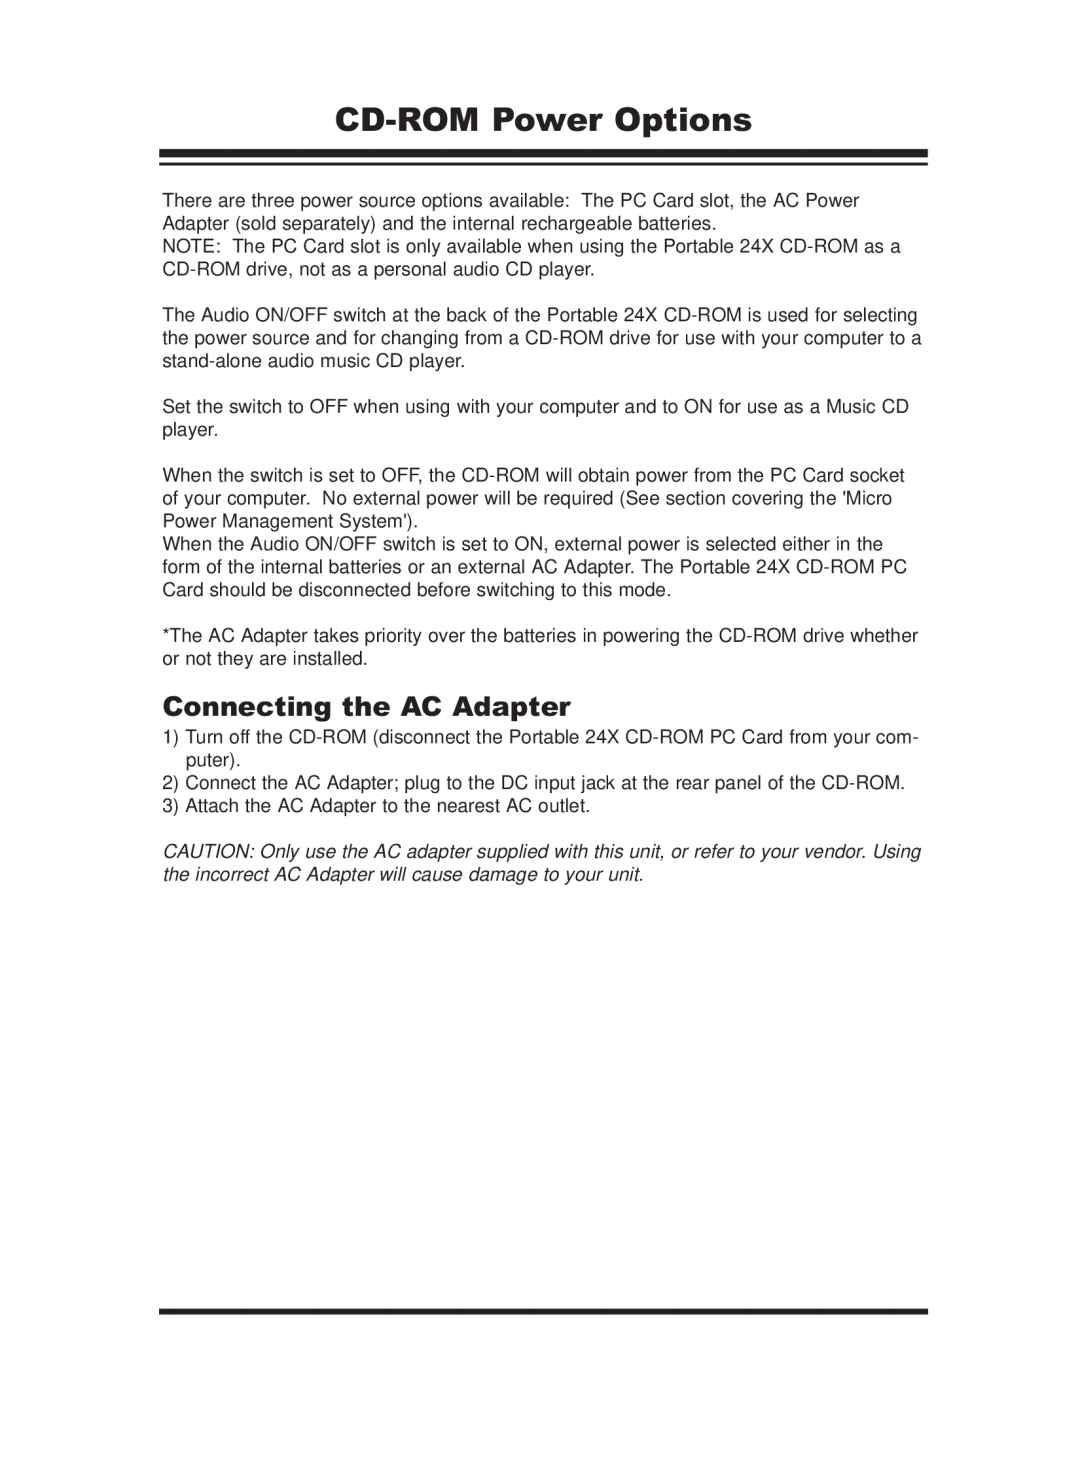 PORT ST24XCDR user manual CD-ROMPower Options, Connecting the AC Adapter 